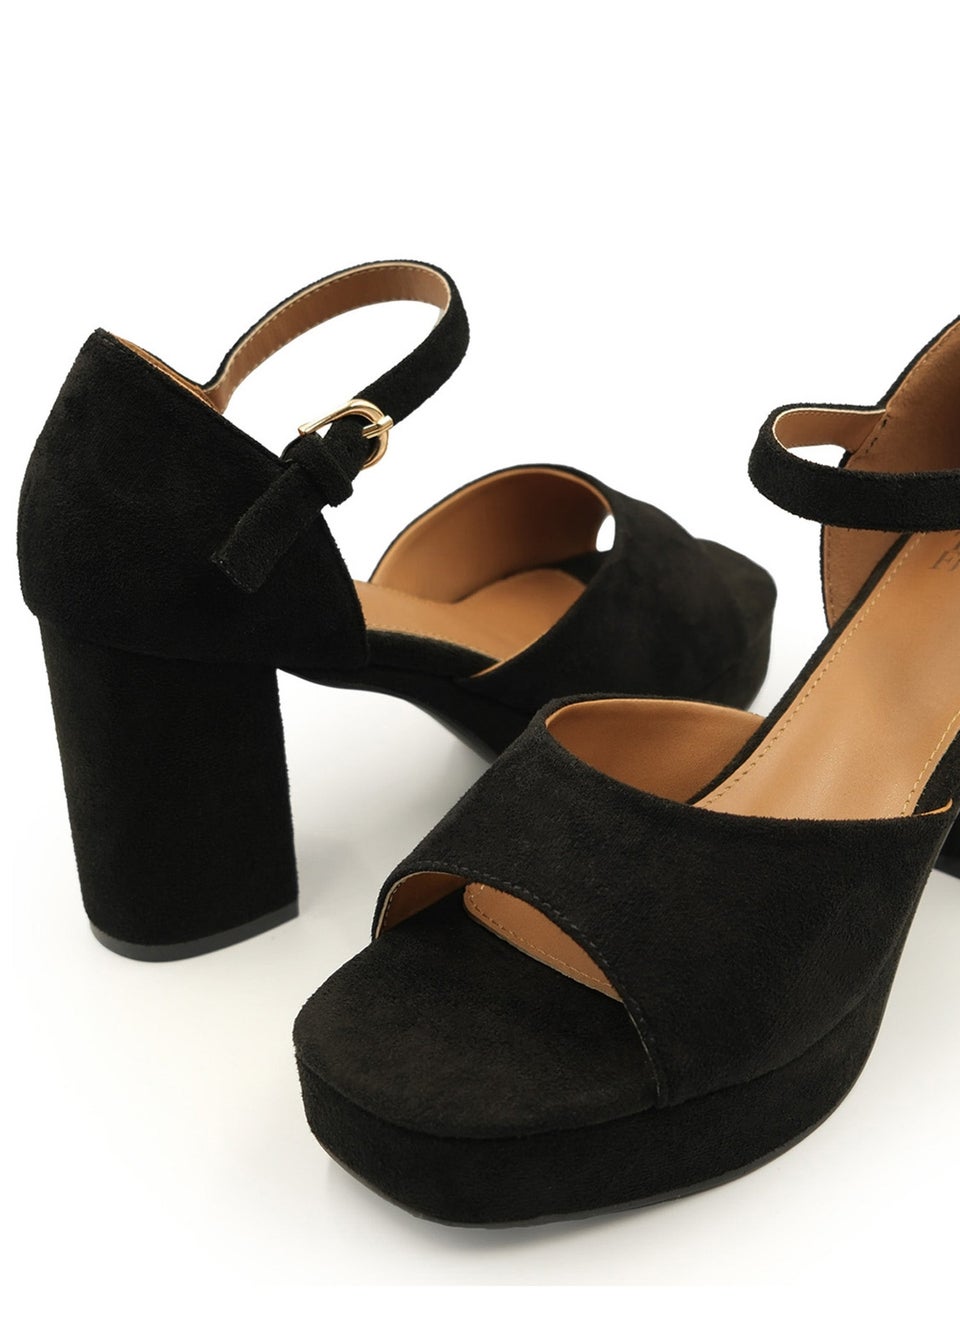 Where's That From Black Wide Fit Suede Marin Platform Heels